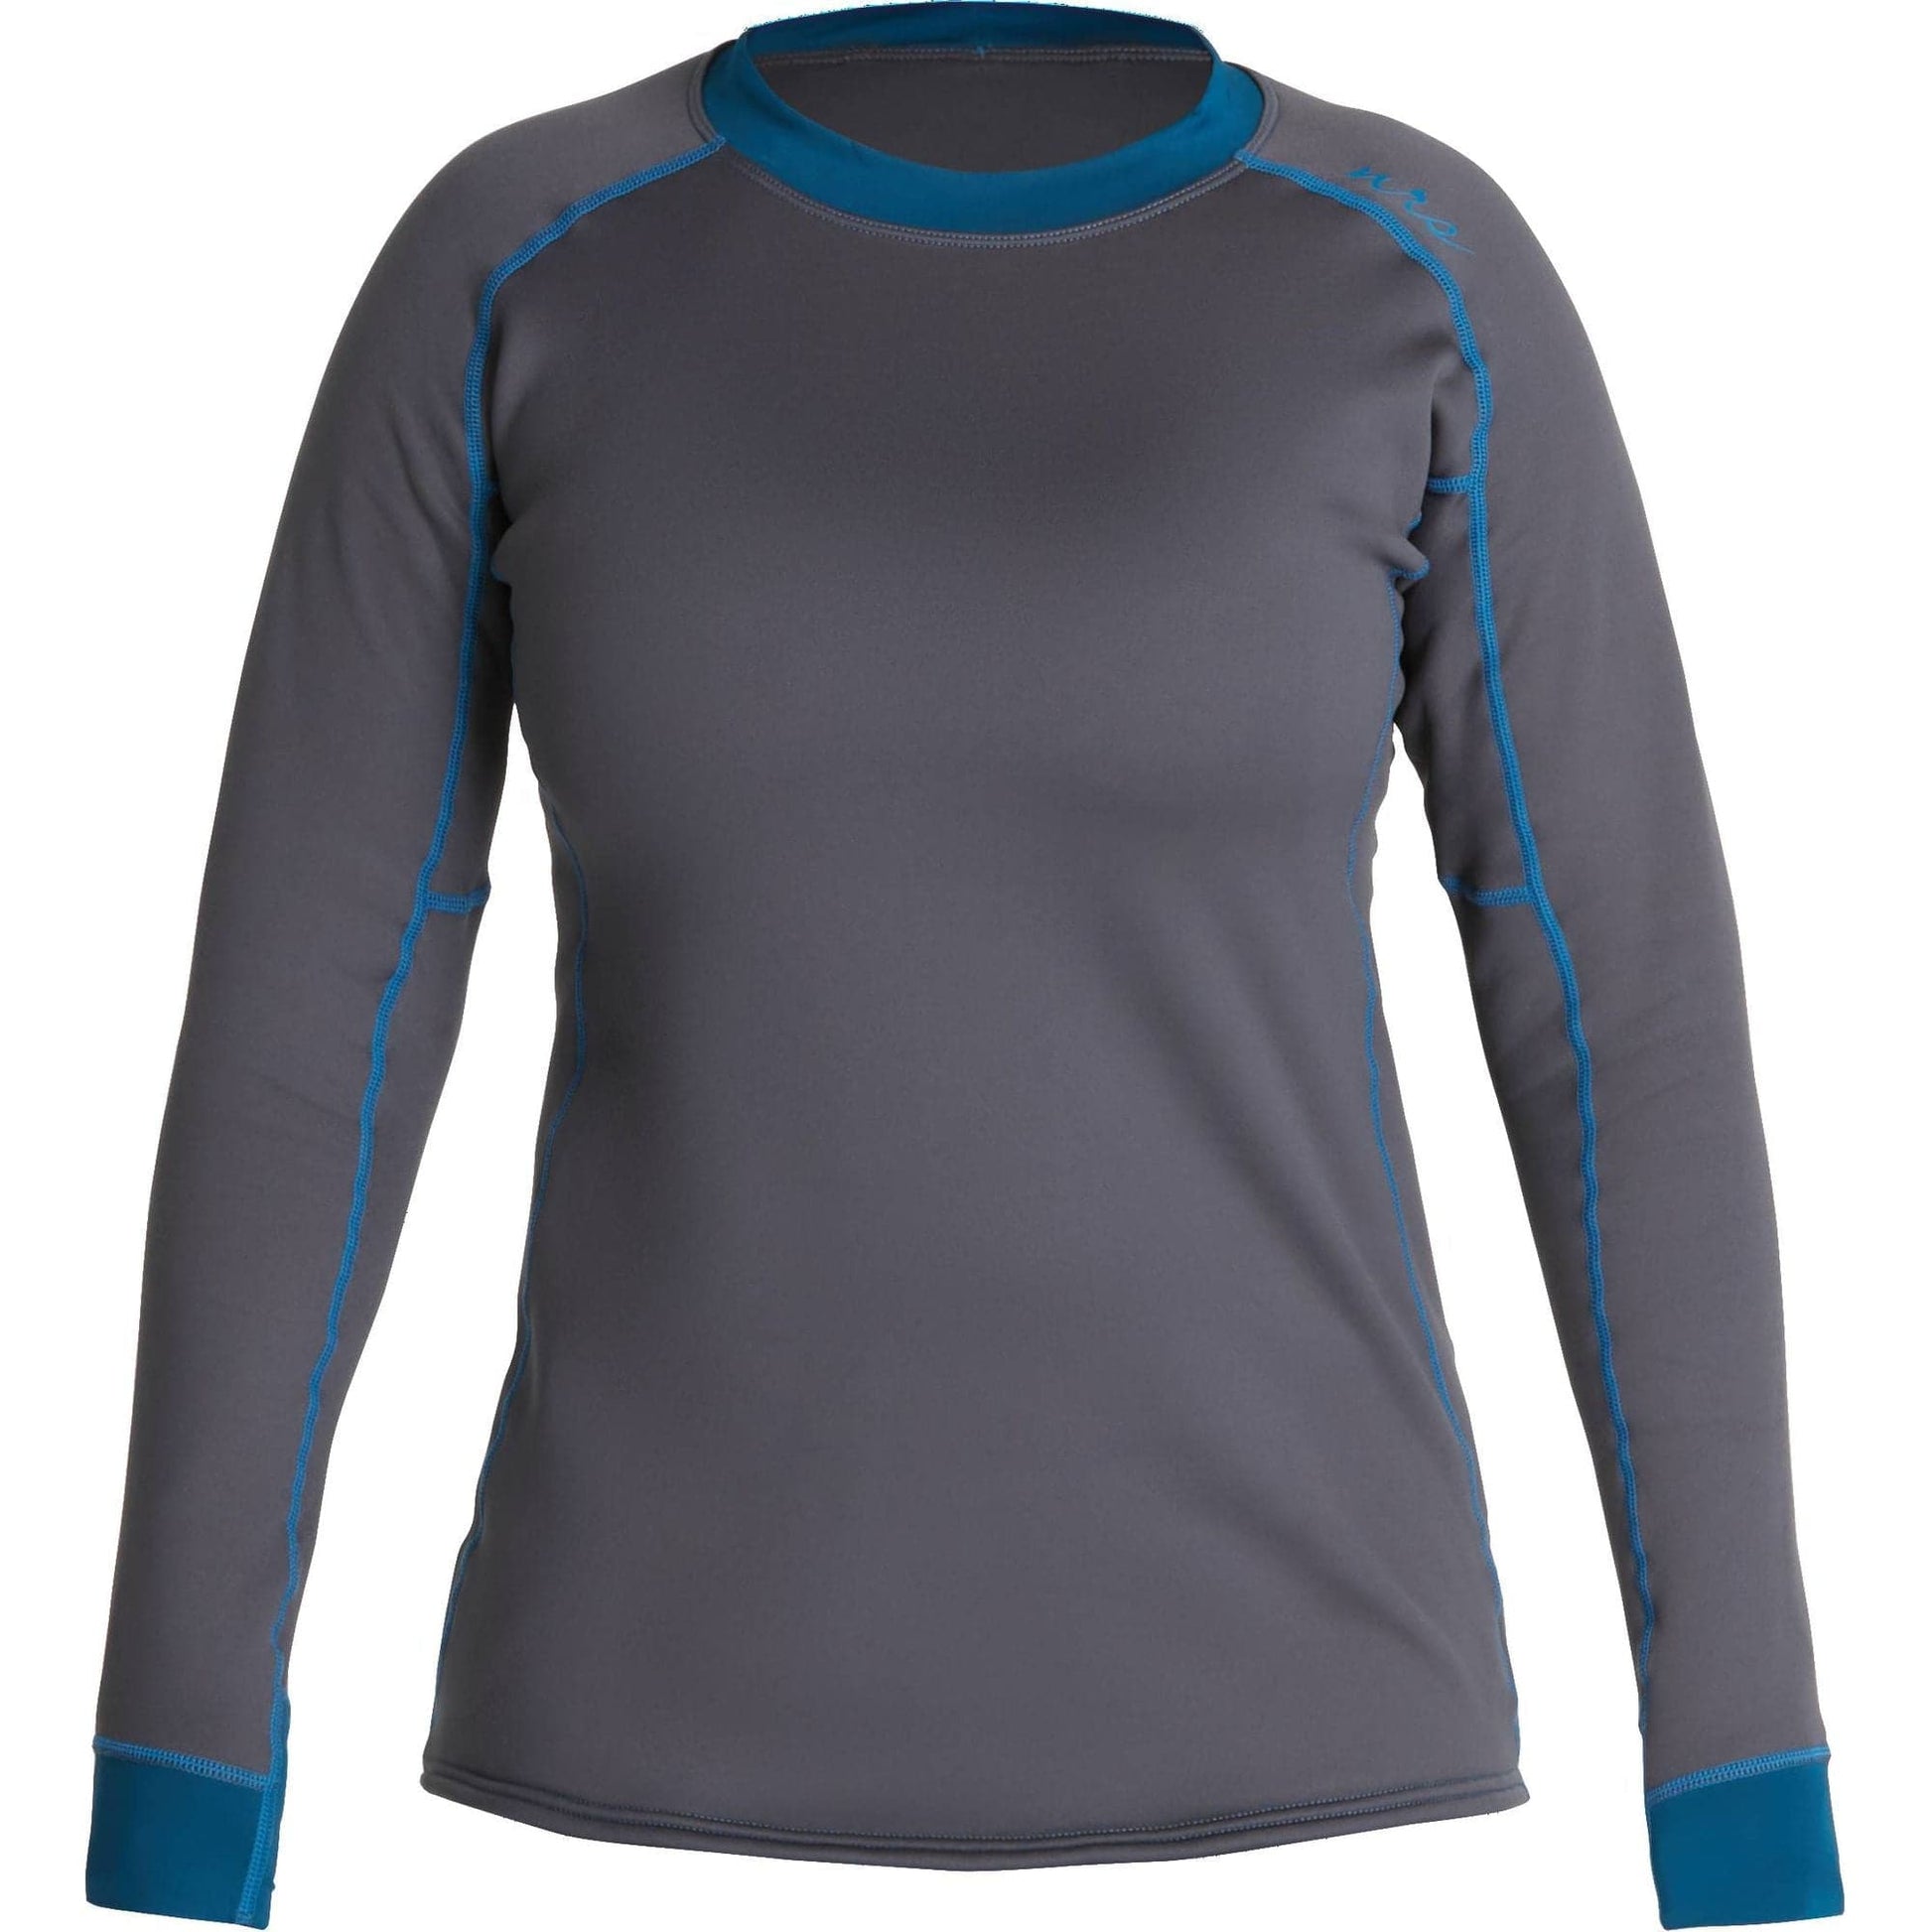 A women's NRS Expedition Fleece - Women's long-sleeved shirt in grey and blue, designed for exceptional comfort and warmth.